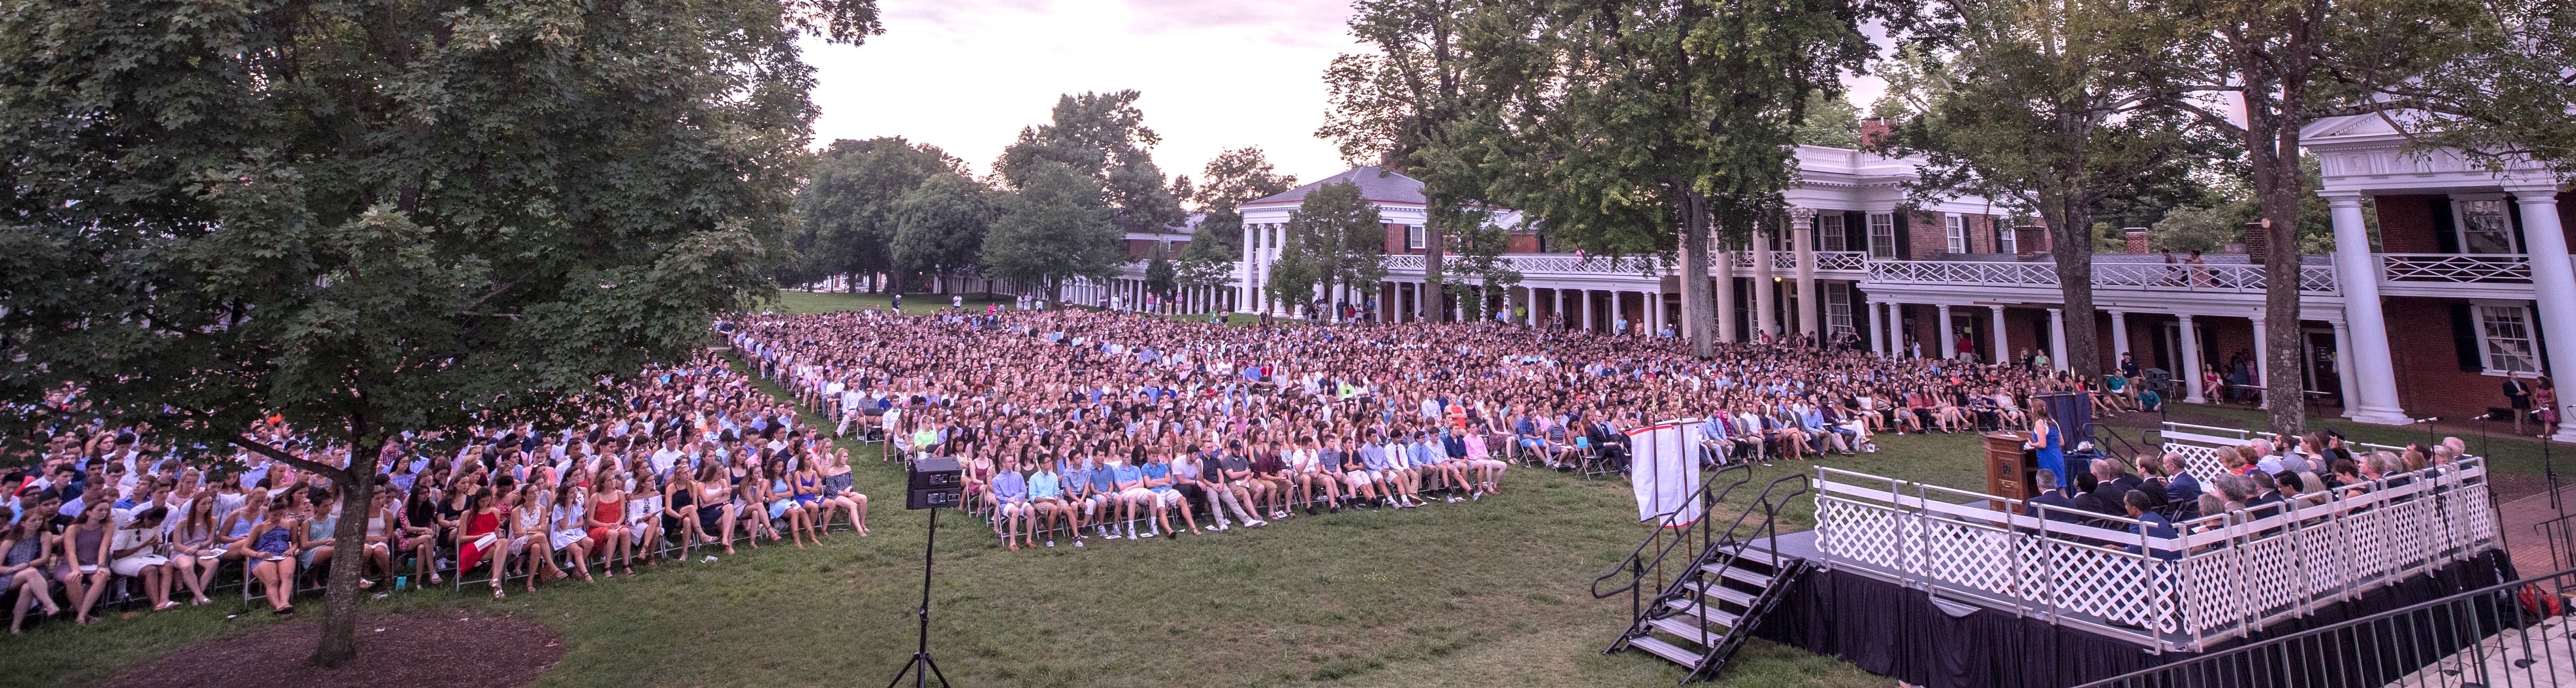 UVA Opening Convocation crowd of students